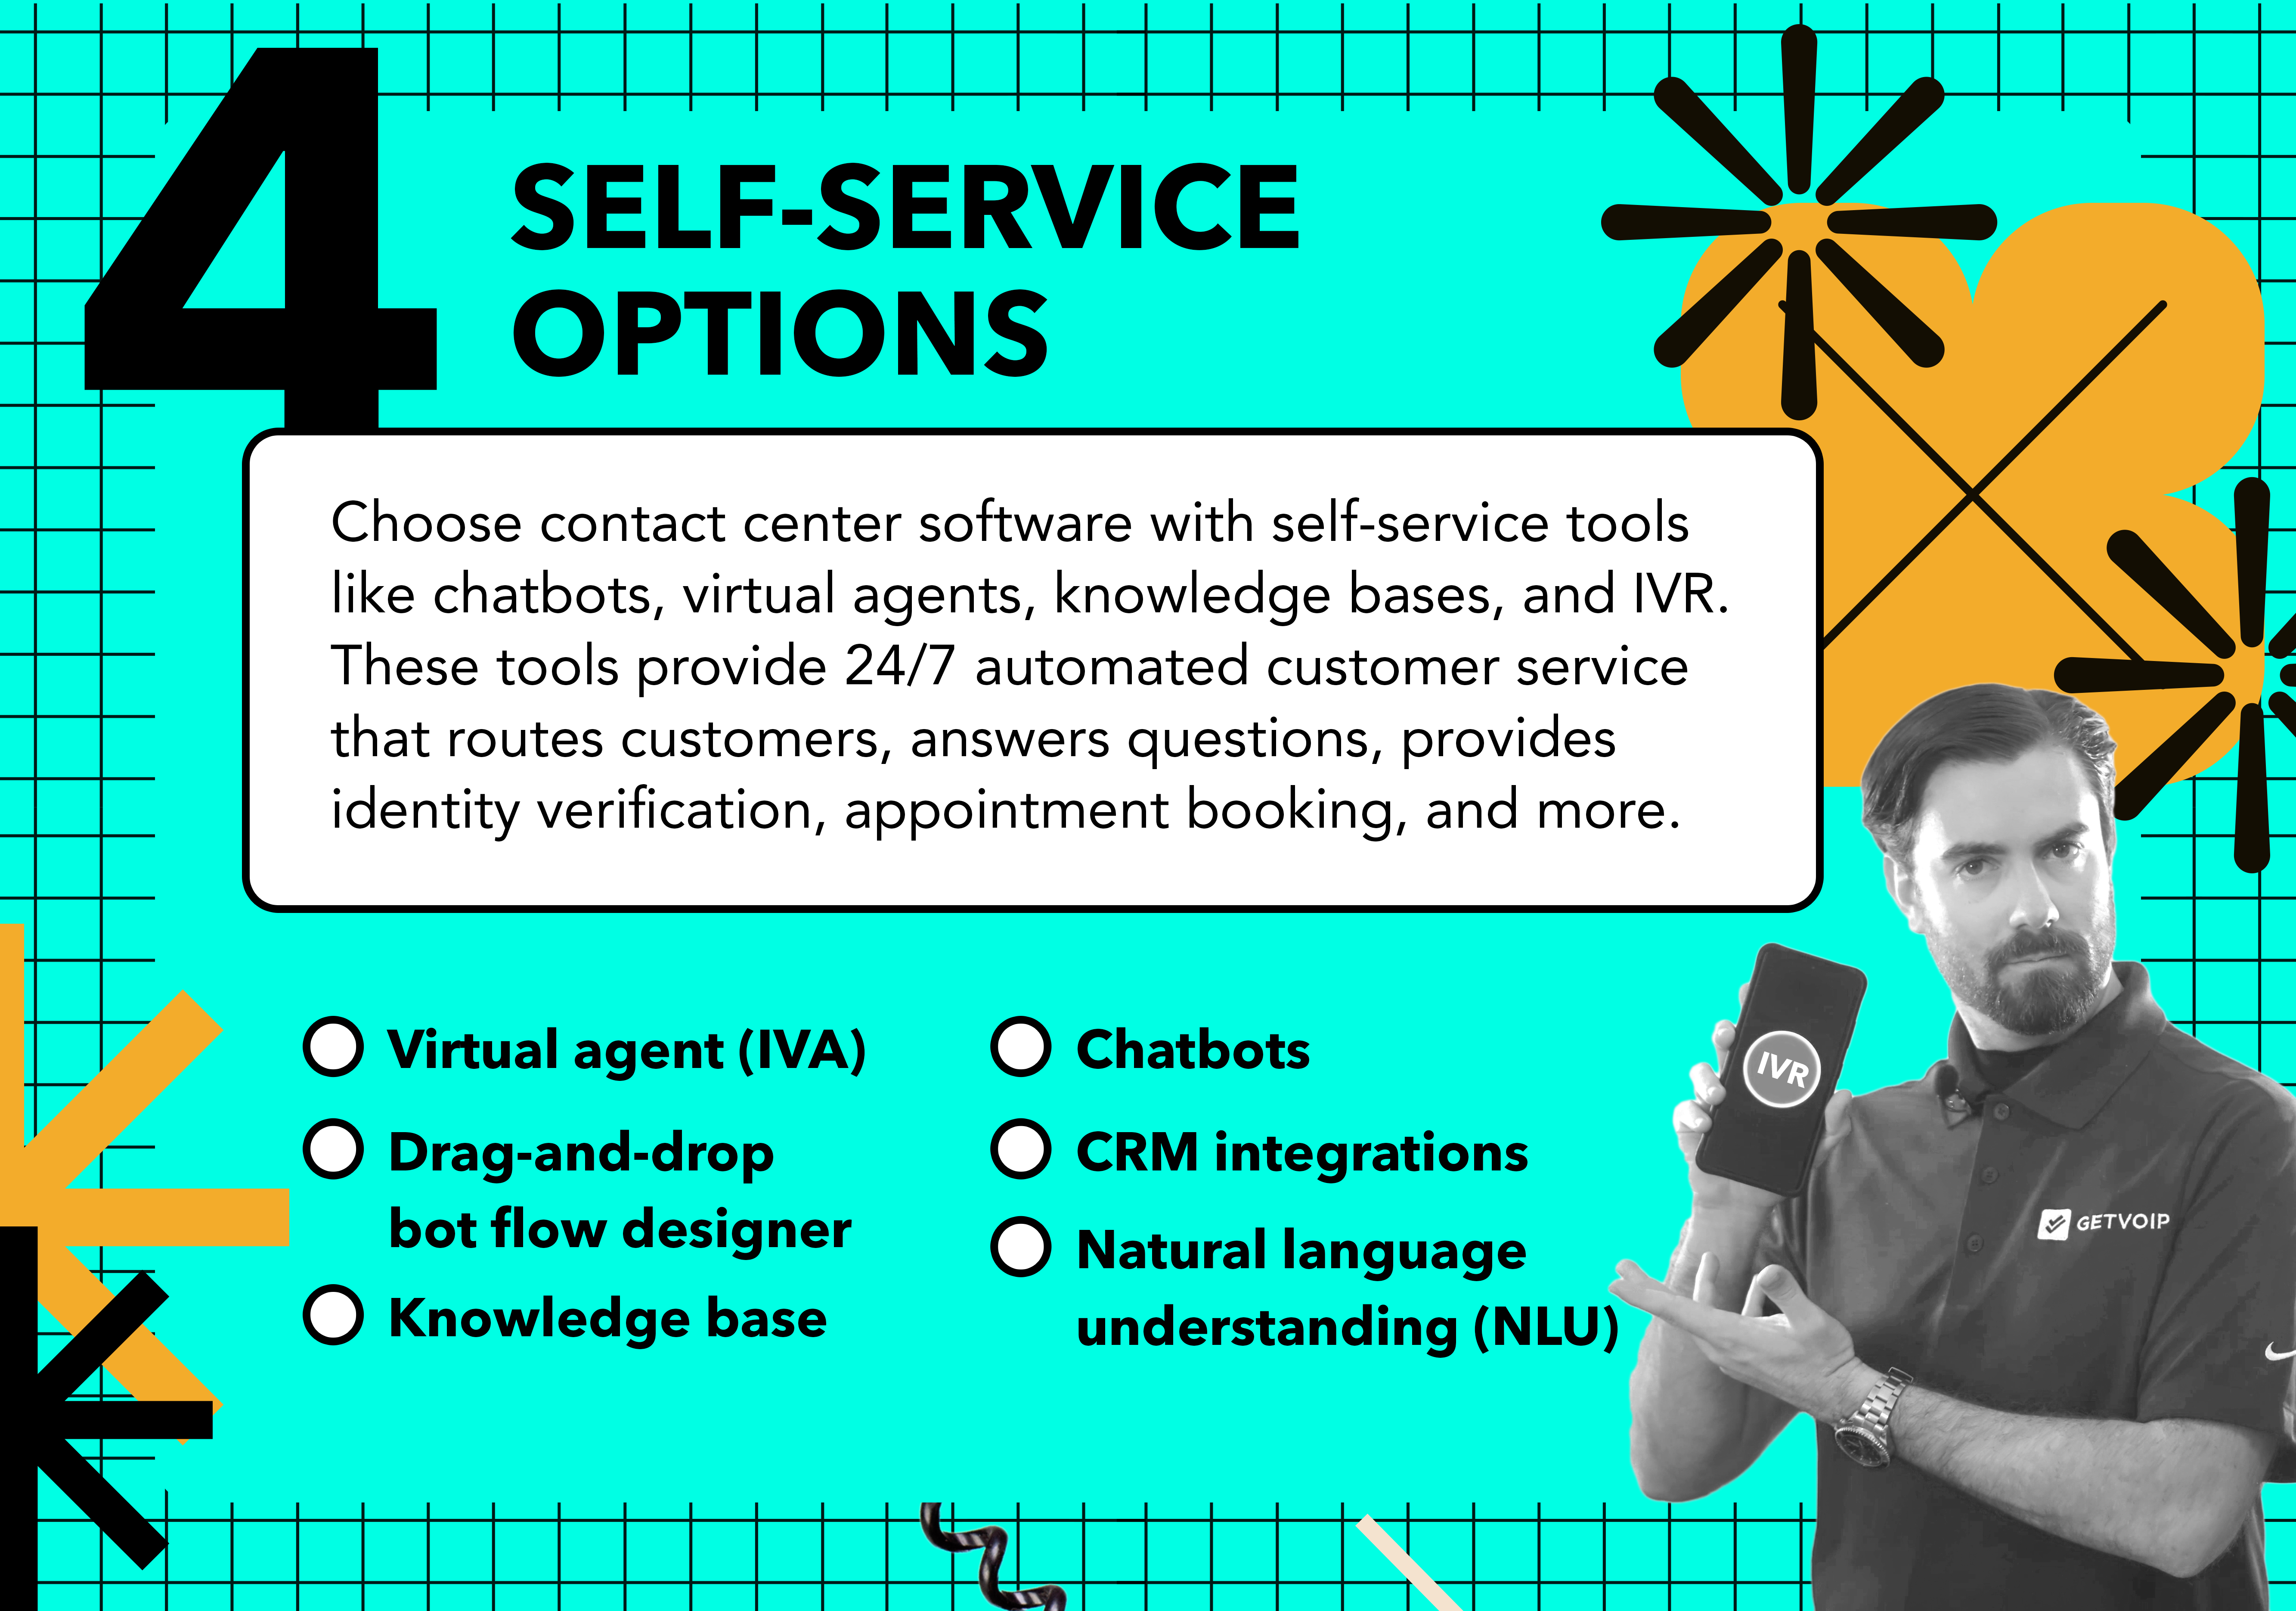 Contact center software requirements checklist - self-service options